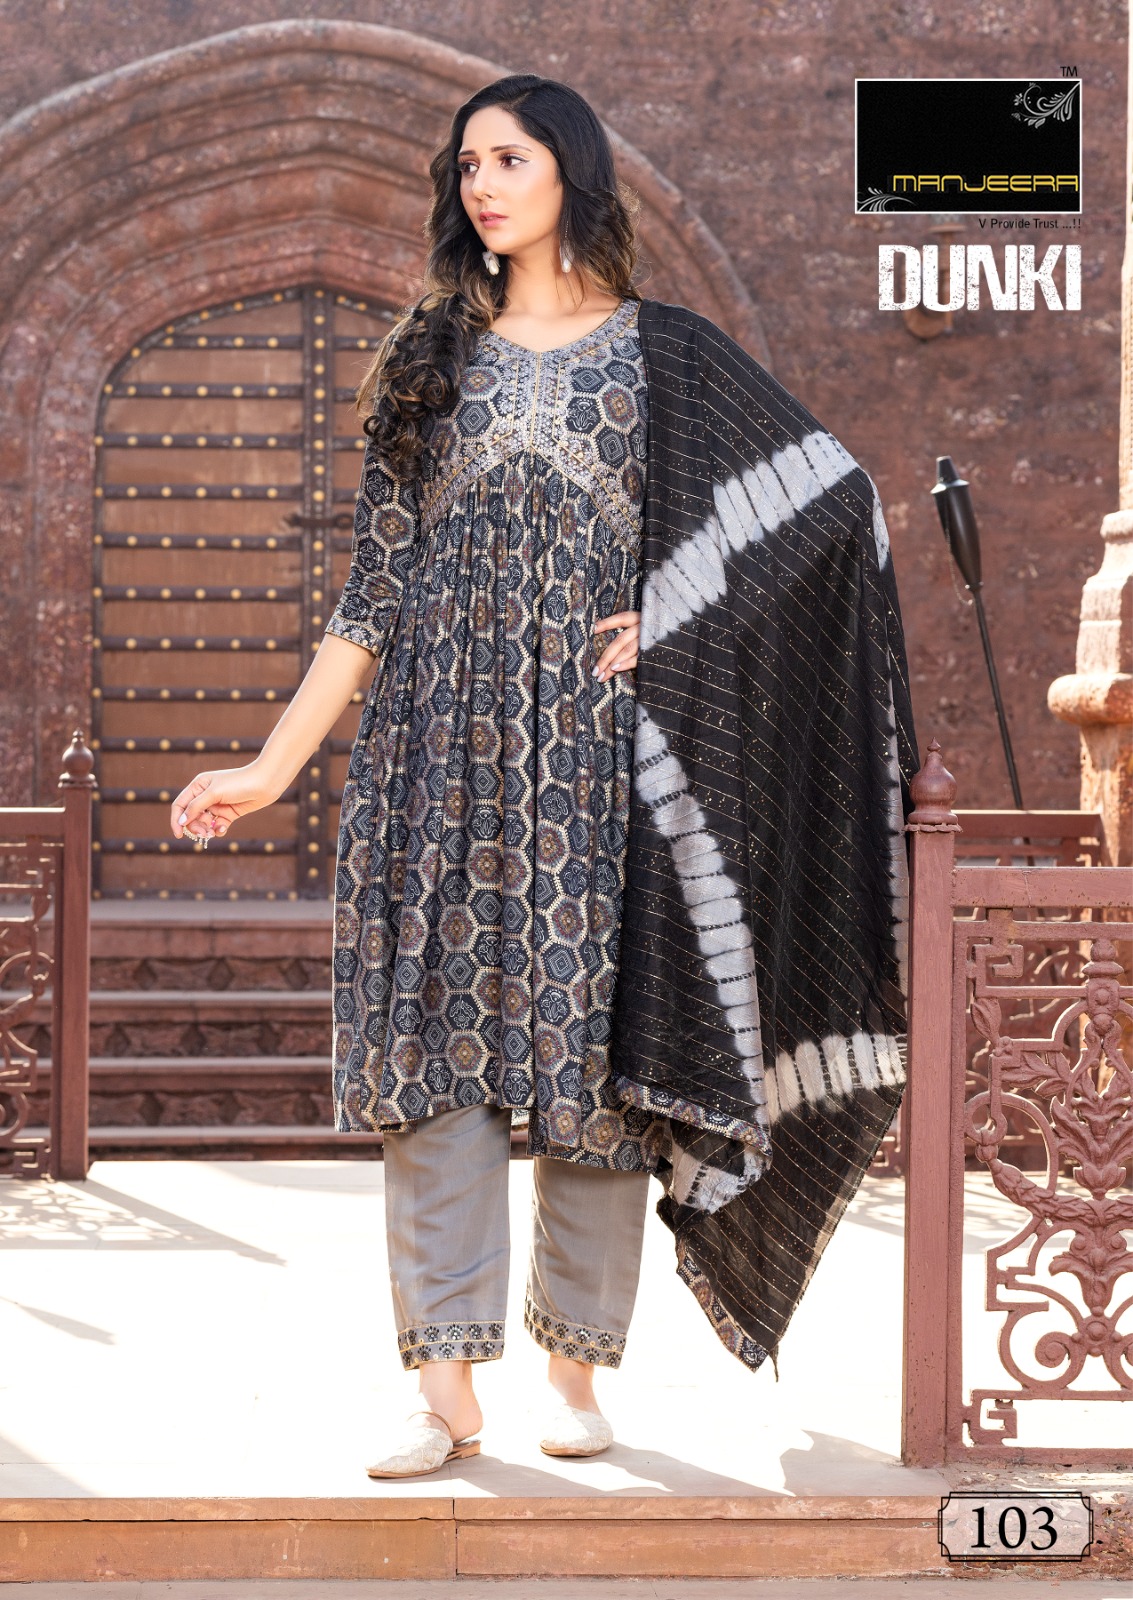 Dunki Manjeera Modal With Work Readymade Pant Style Suits